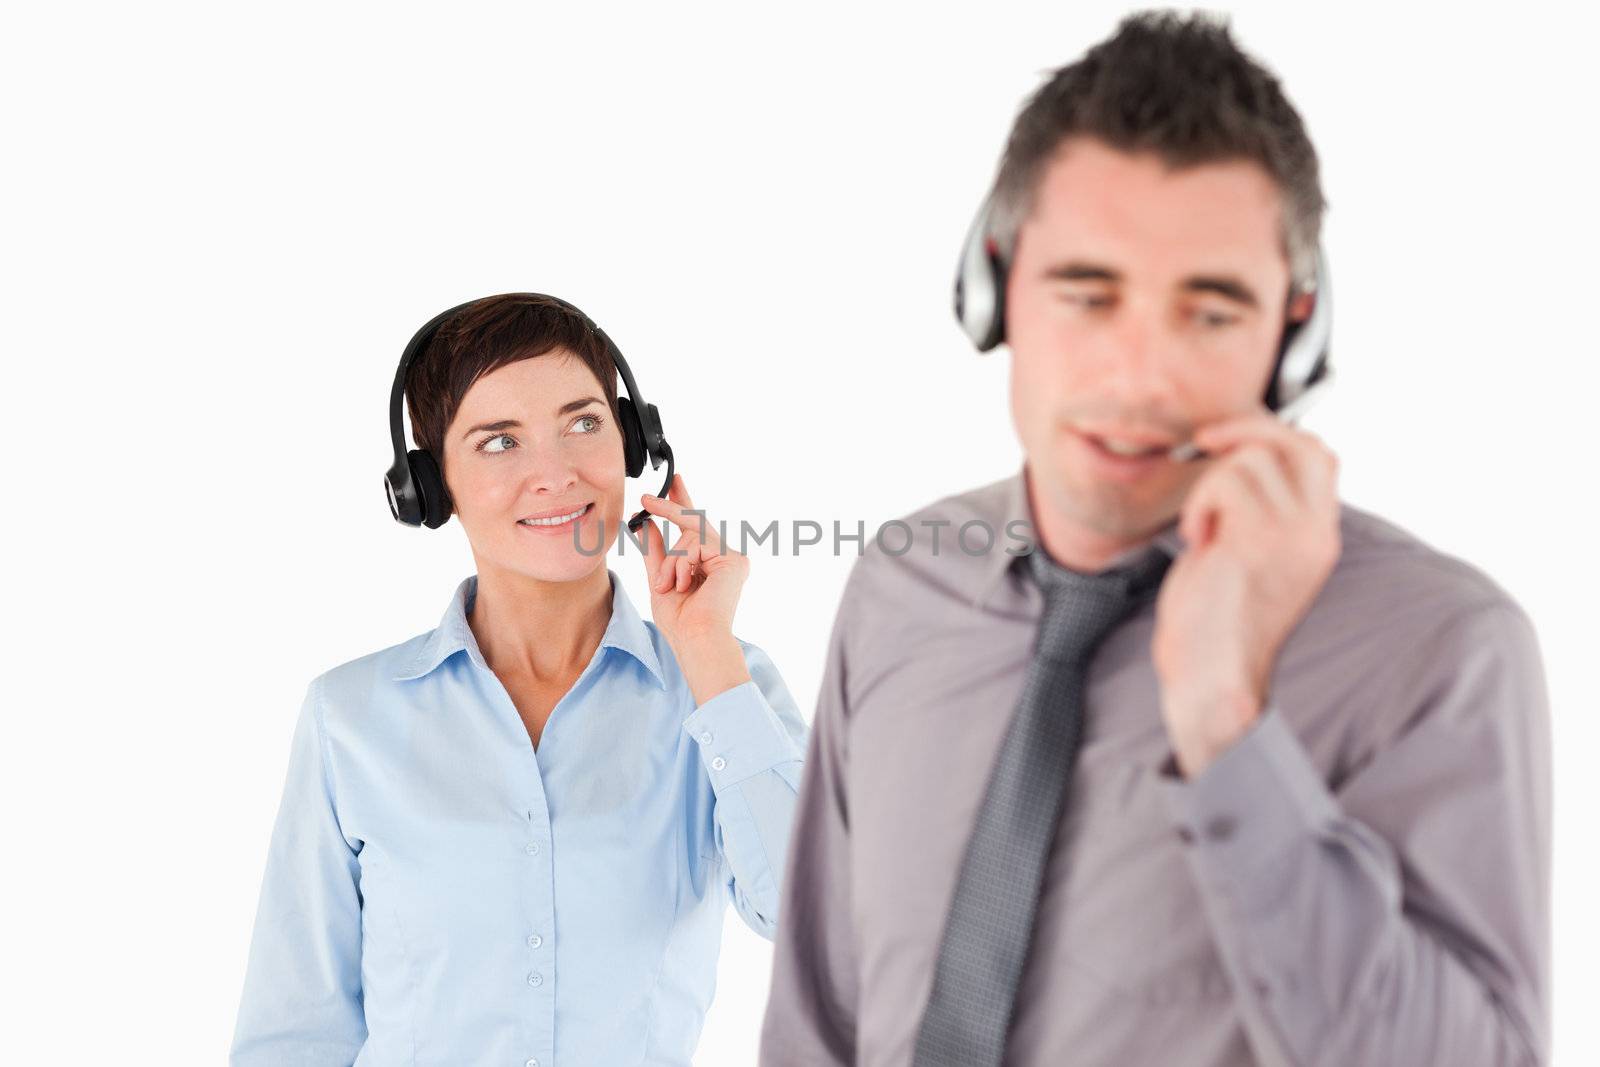 Business people speaking through headsets against a white background